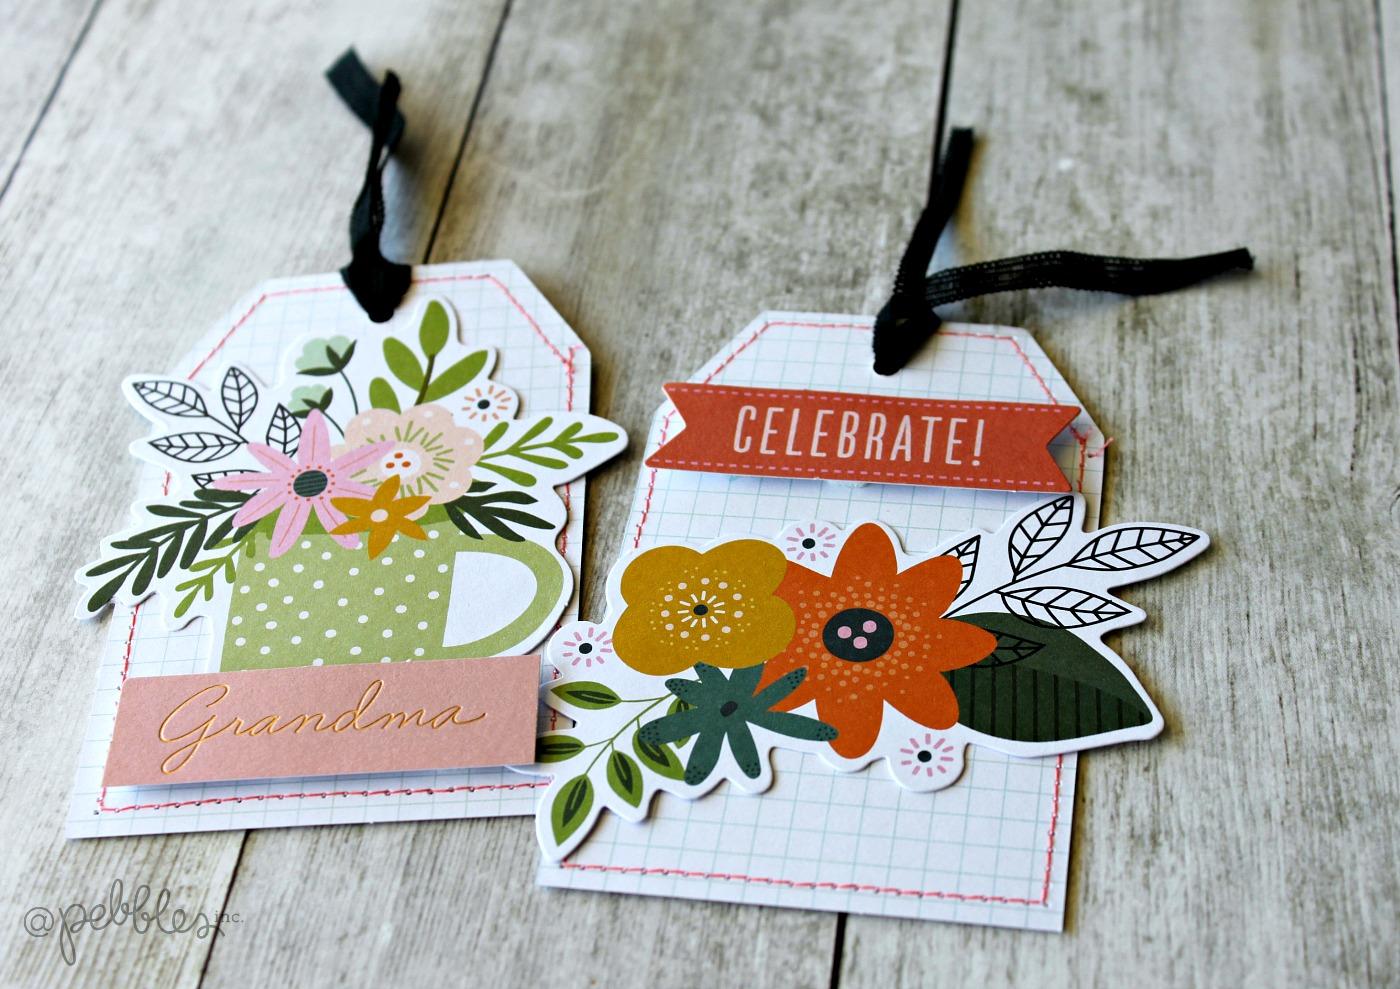 5-Minute handmade gift tags with Stitched Edges! Create adorable handmade tags in minutes with This is Family scrapbook line and sewn edges.